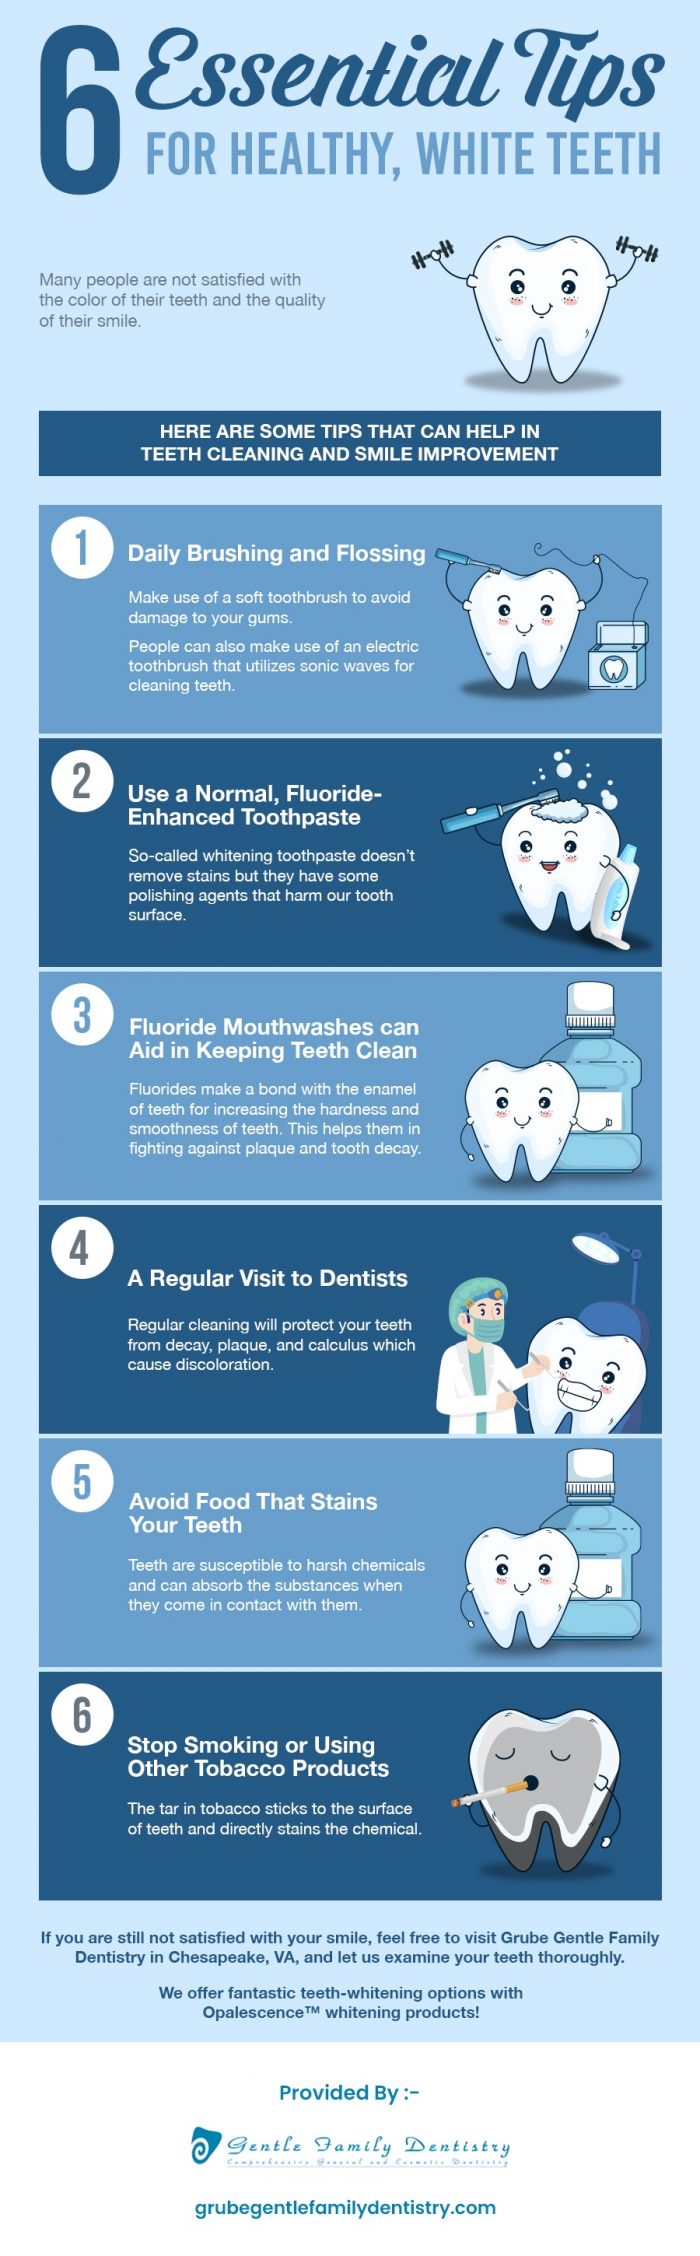 Achieve A Bright Smile with Teeth Whitening Procedure in Chesapeake, VA from Grube Gentle Family ...